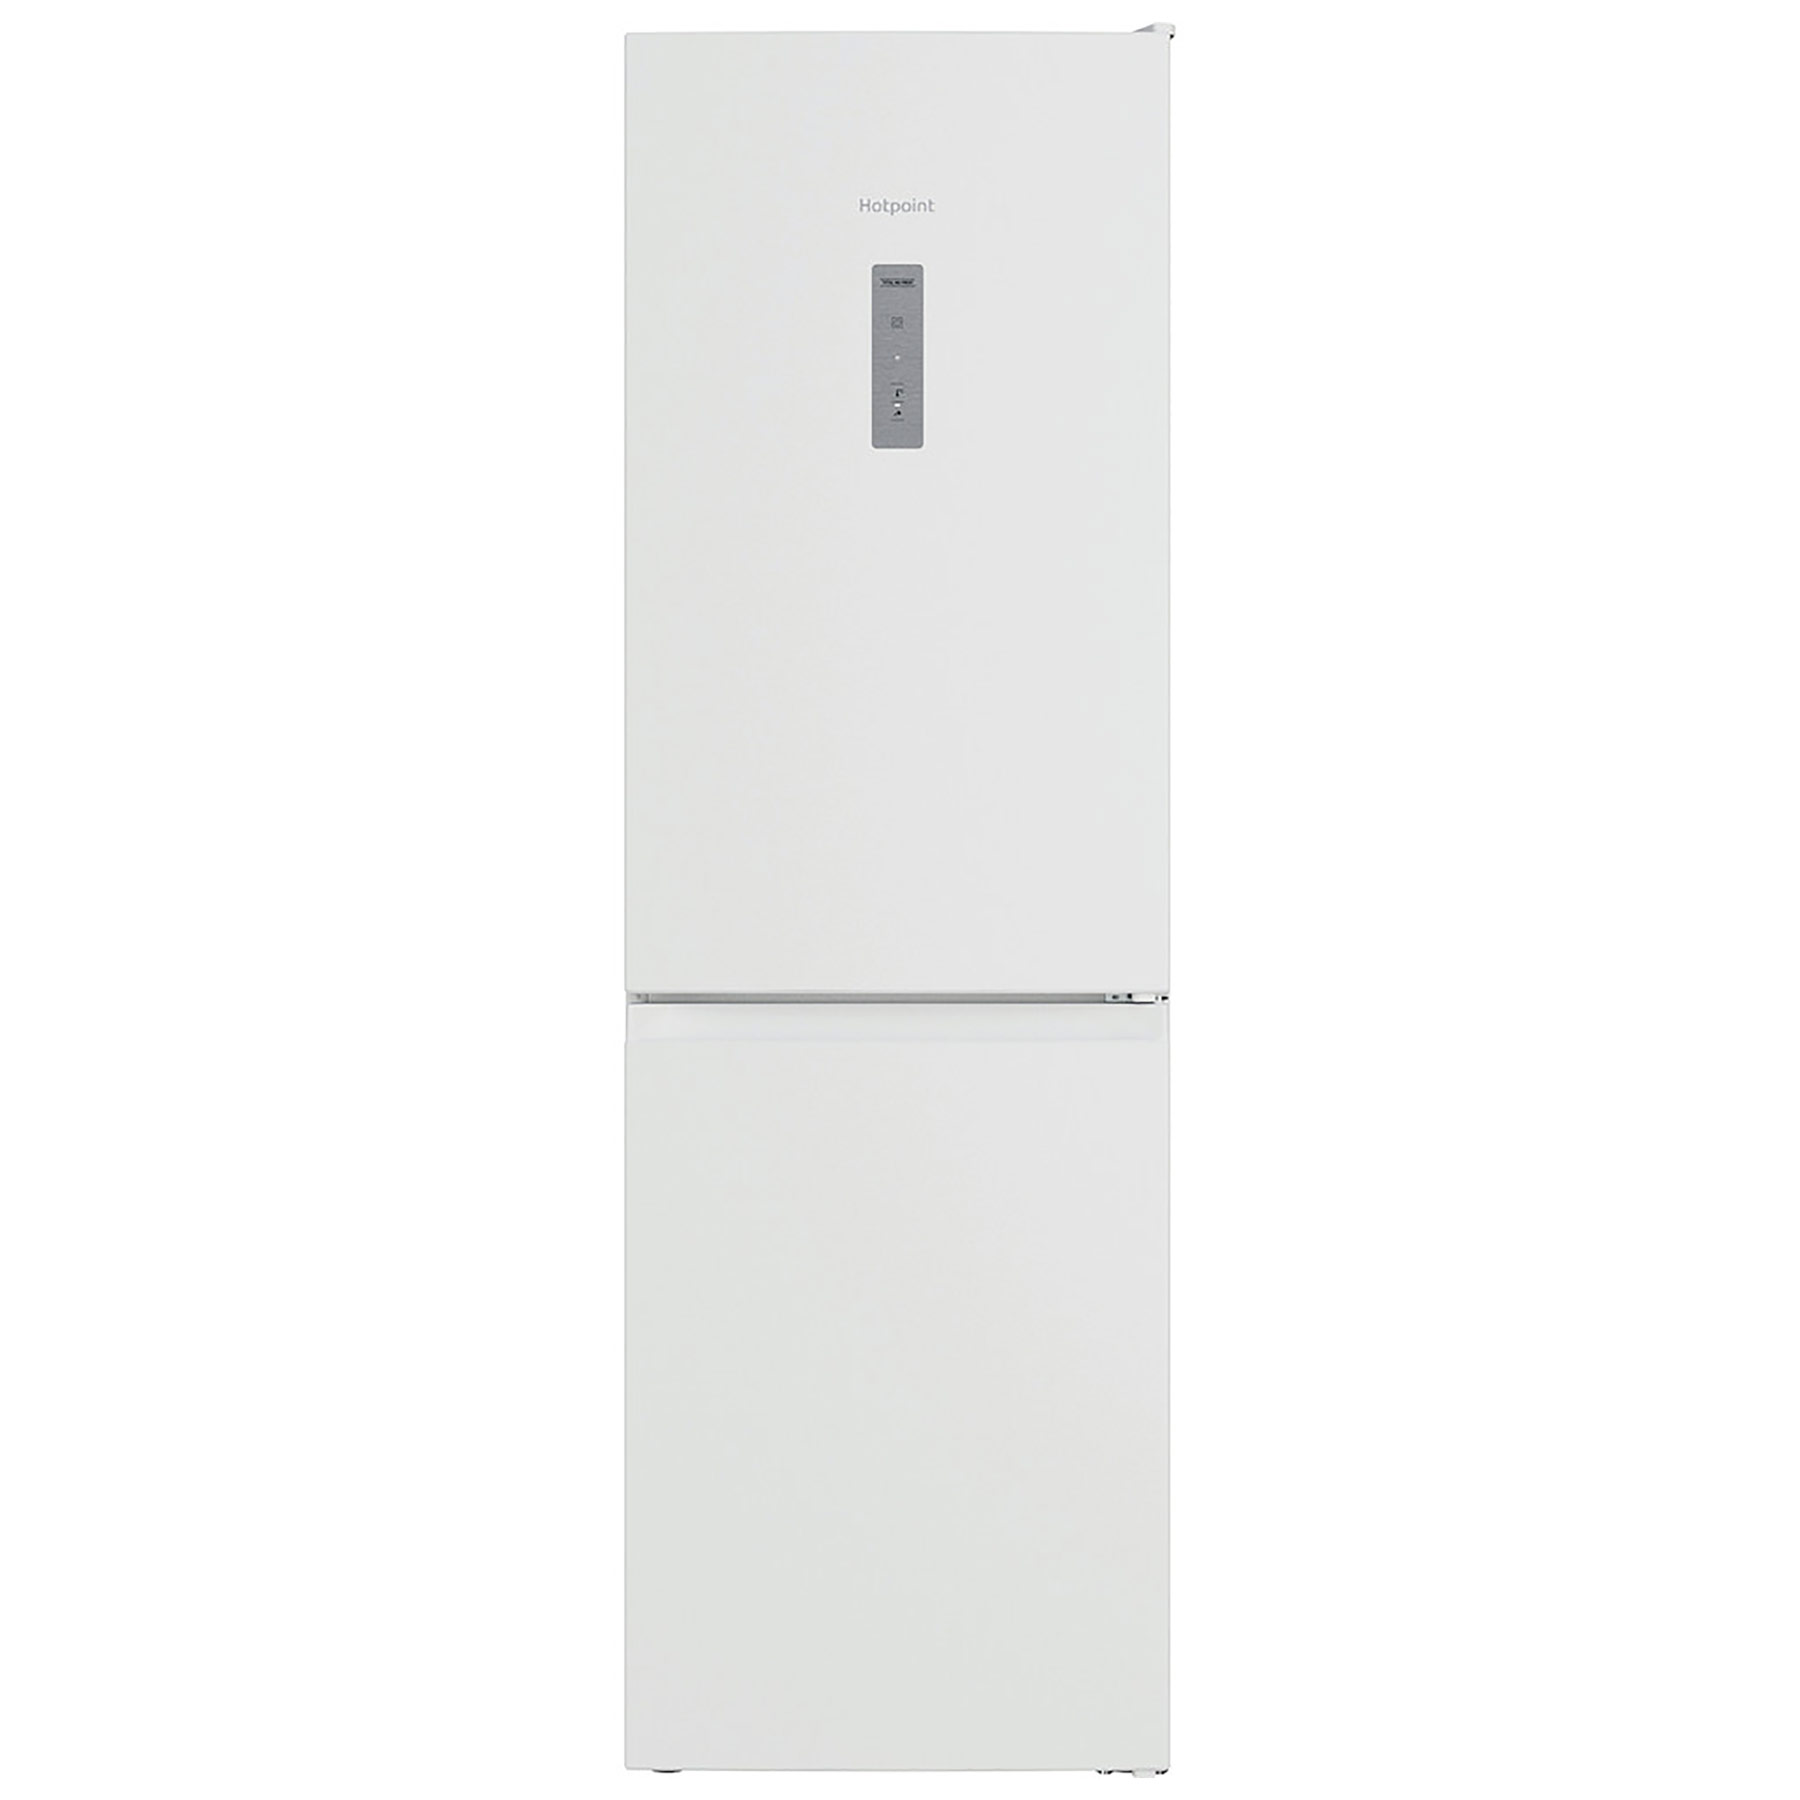 Image of Hotpoint H5X82OW 60cm Frost Free Fridge Freezer in White 1 91m E Rated